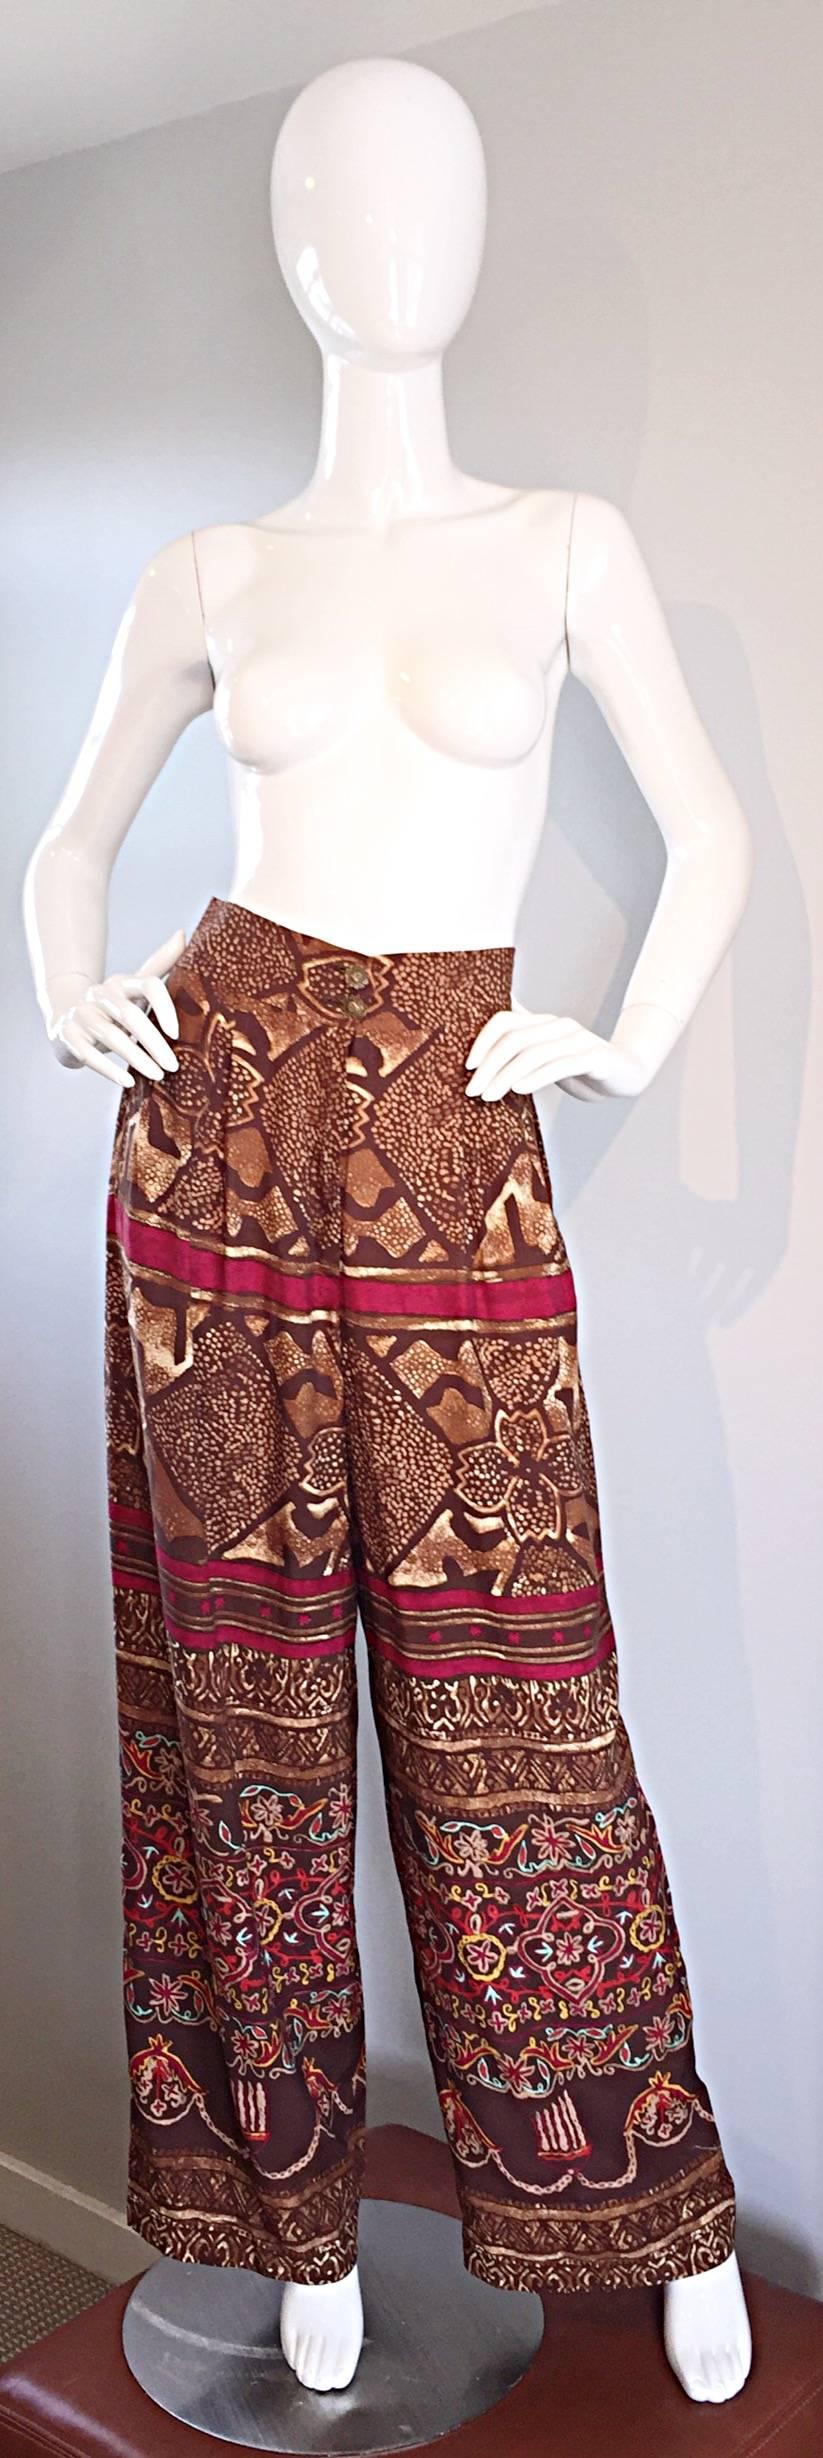 Incredible vintage CHRISTIAN LACROIX trousers! Flattering high waist, with zipper at fly, and two brass floral buttons at waist. Ethnic, tribal print, with a touch of animal! Fitted, with a wide leg. Extremely rare, and super impressive on! Pairs